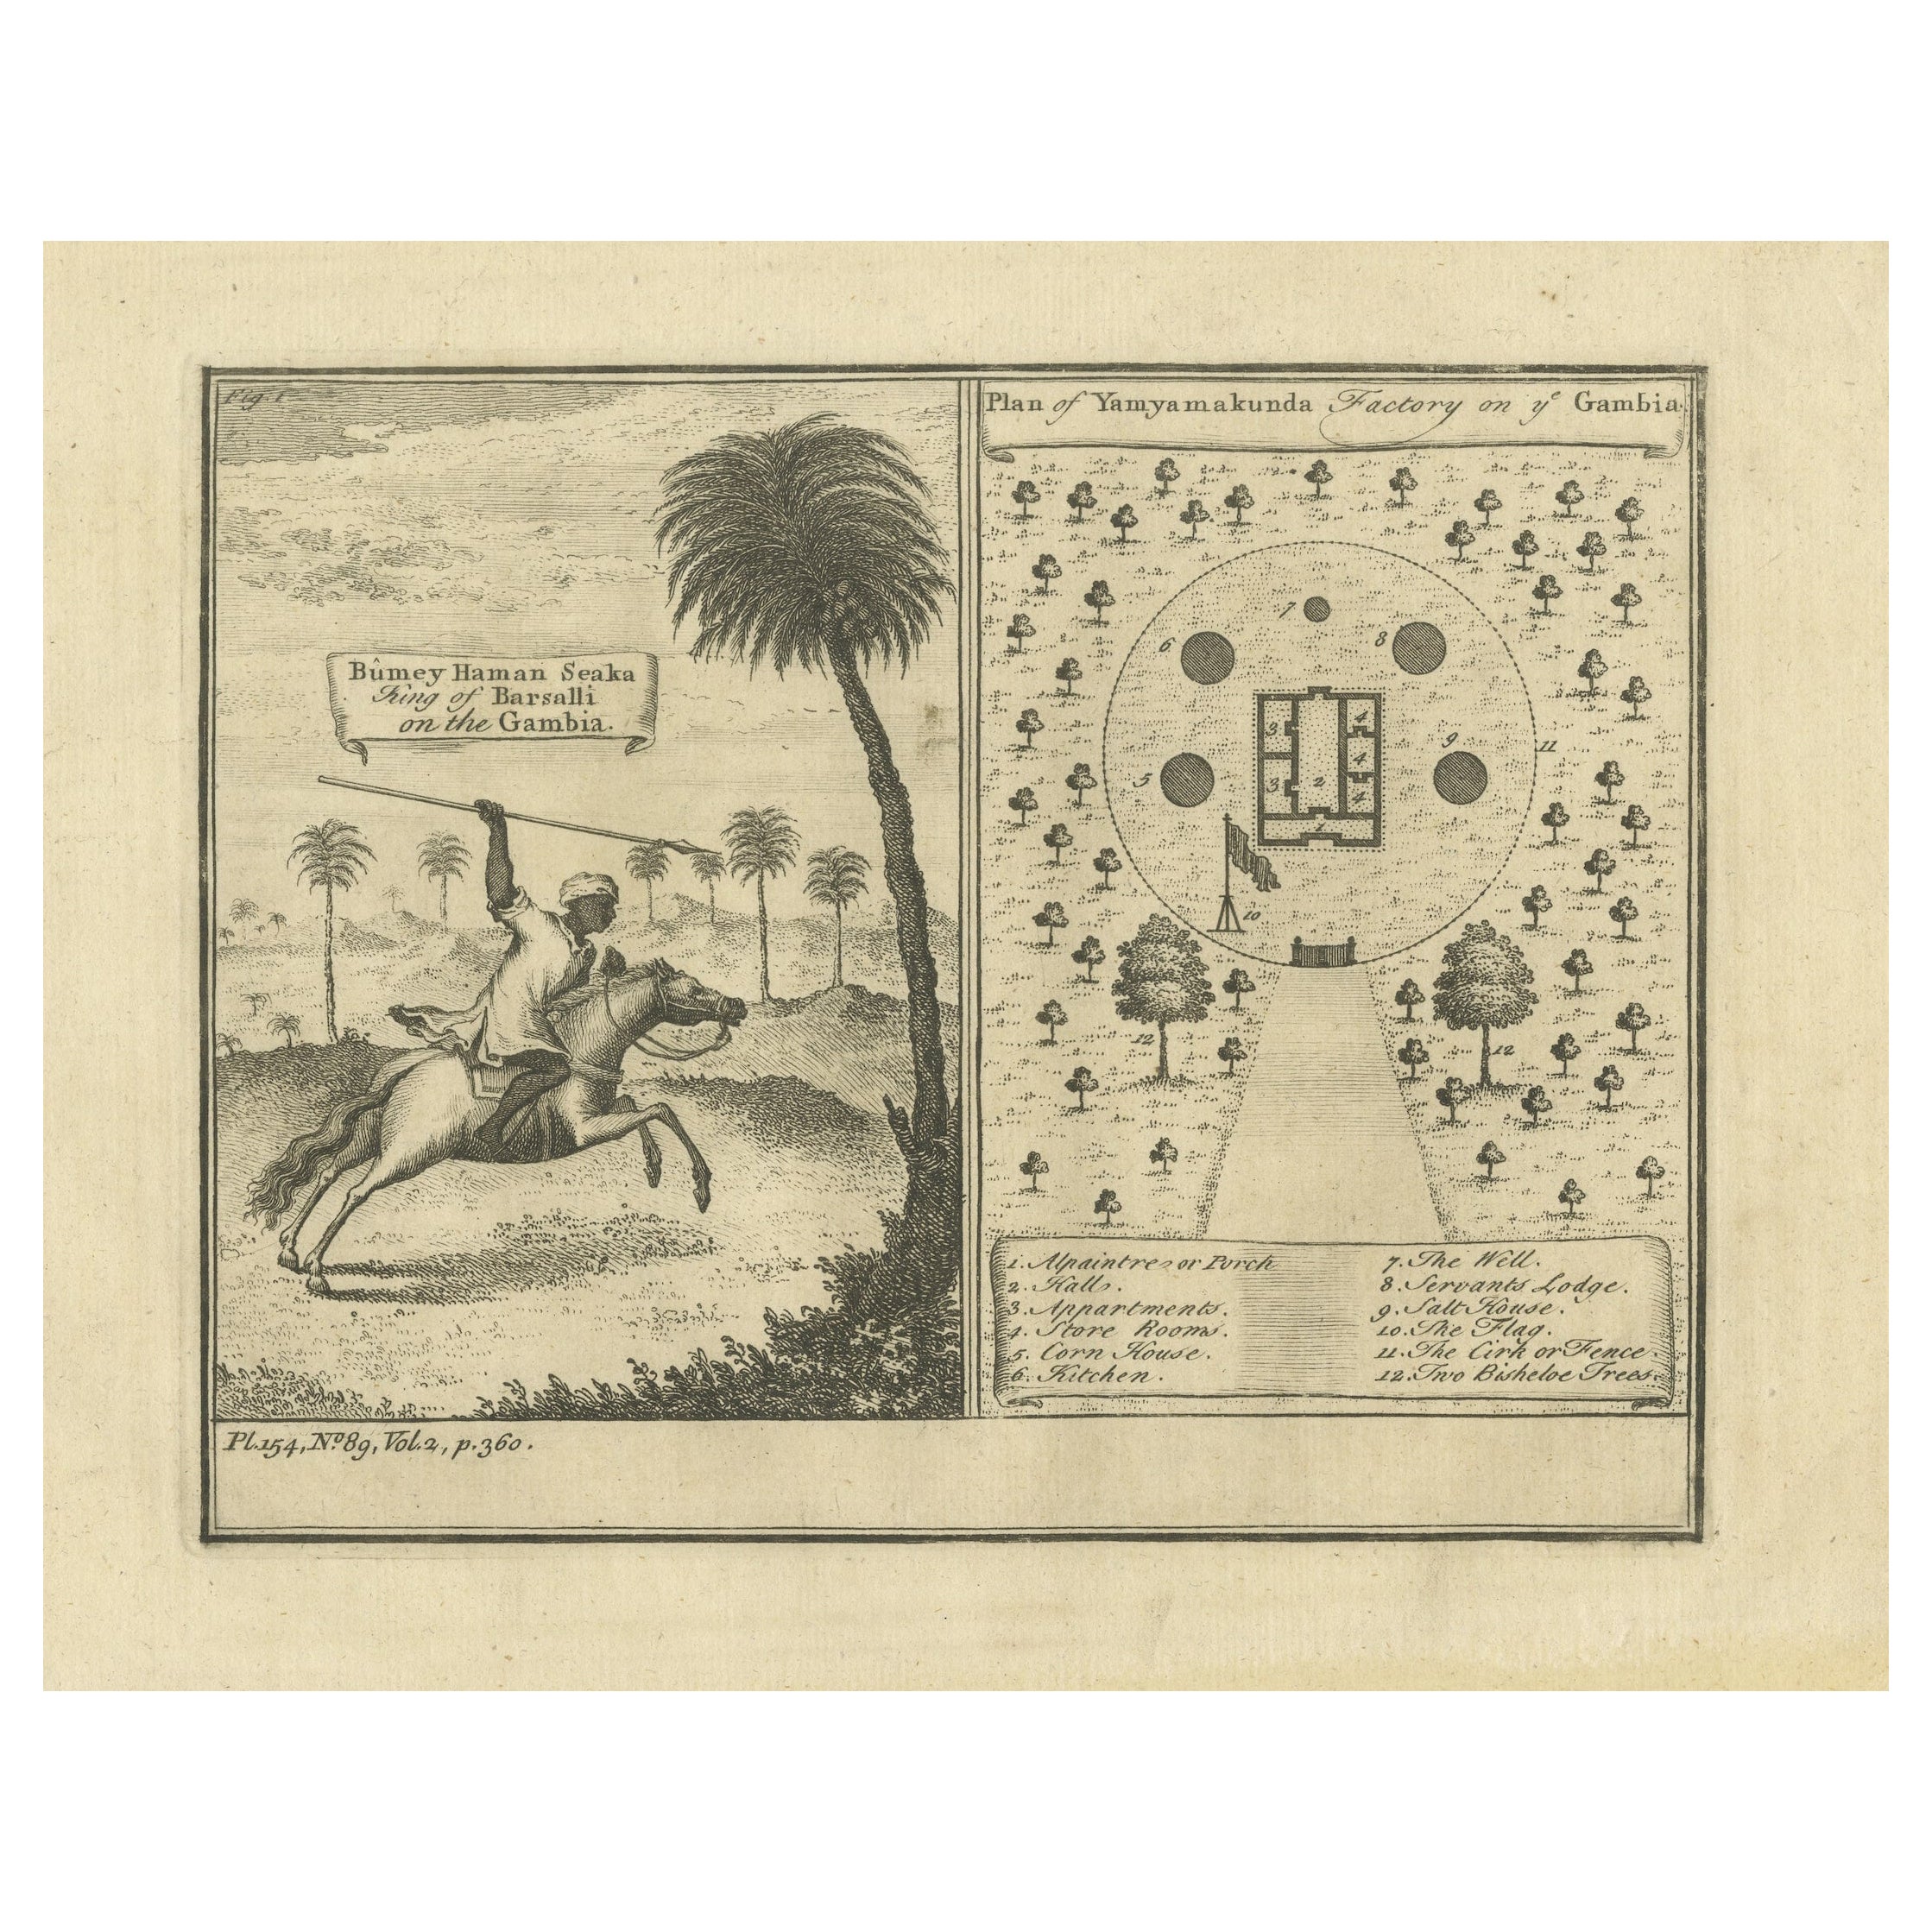 Antique Print of the King of Barsalli & the Yamyamakunda Factory, Gambia, C1730 For Sale